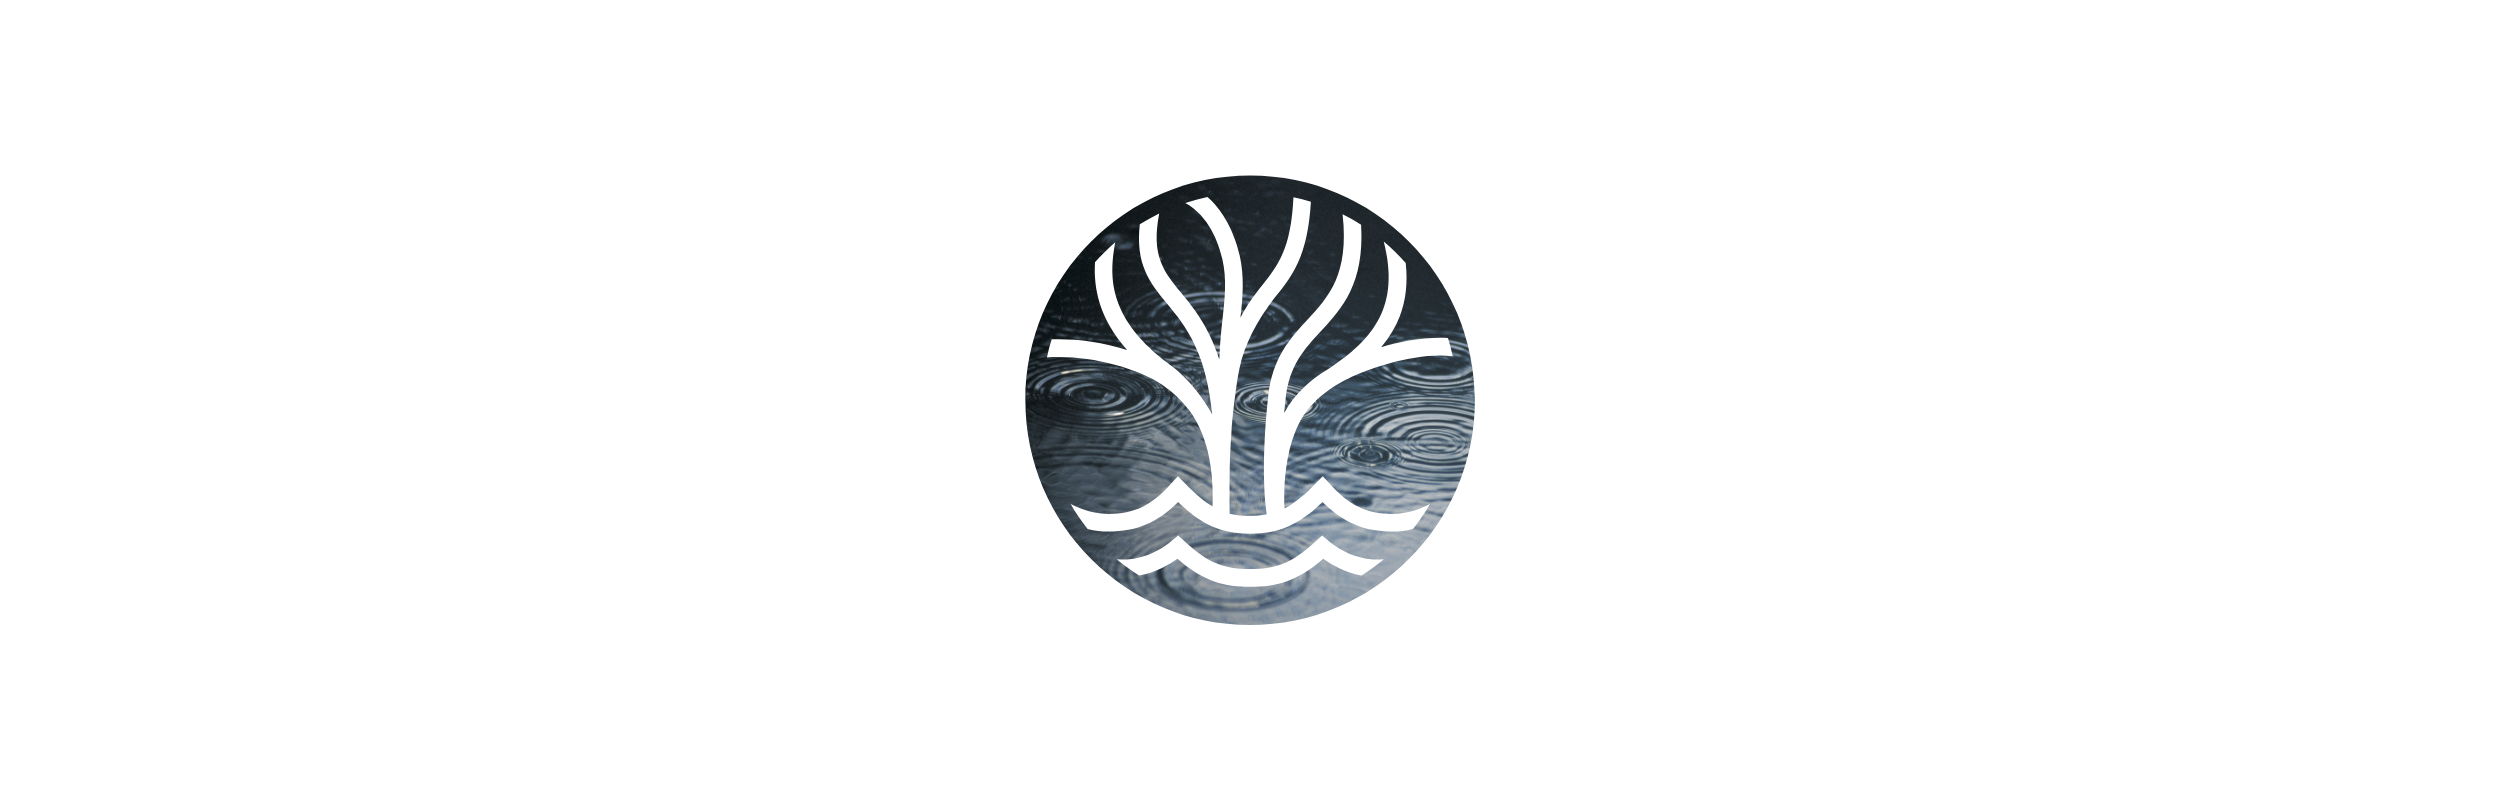 Wavetree icon with water puddle background